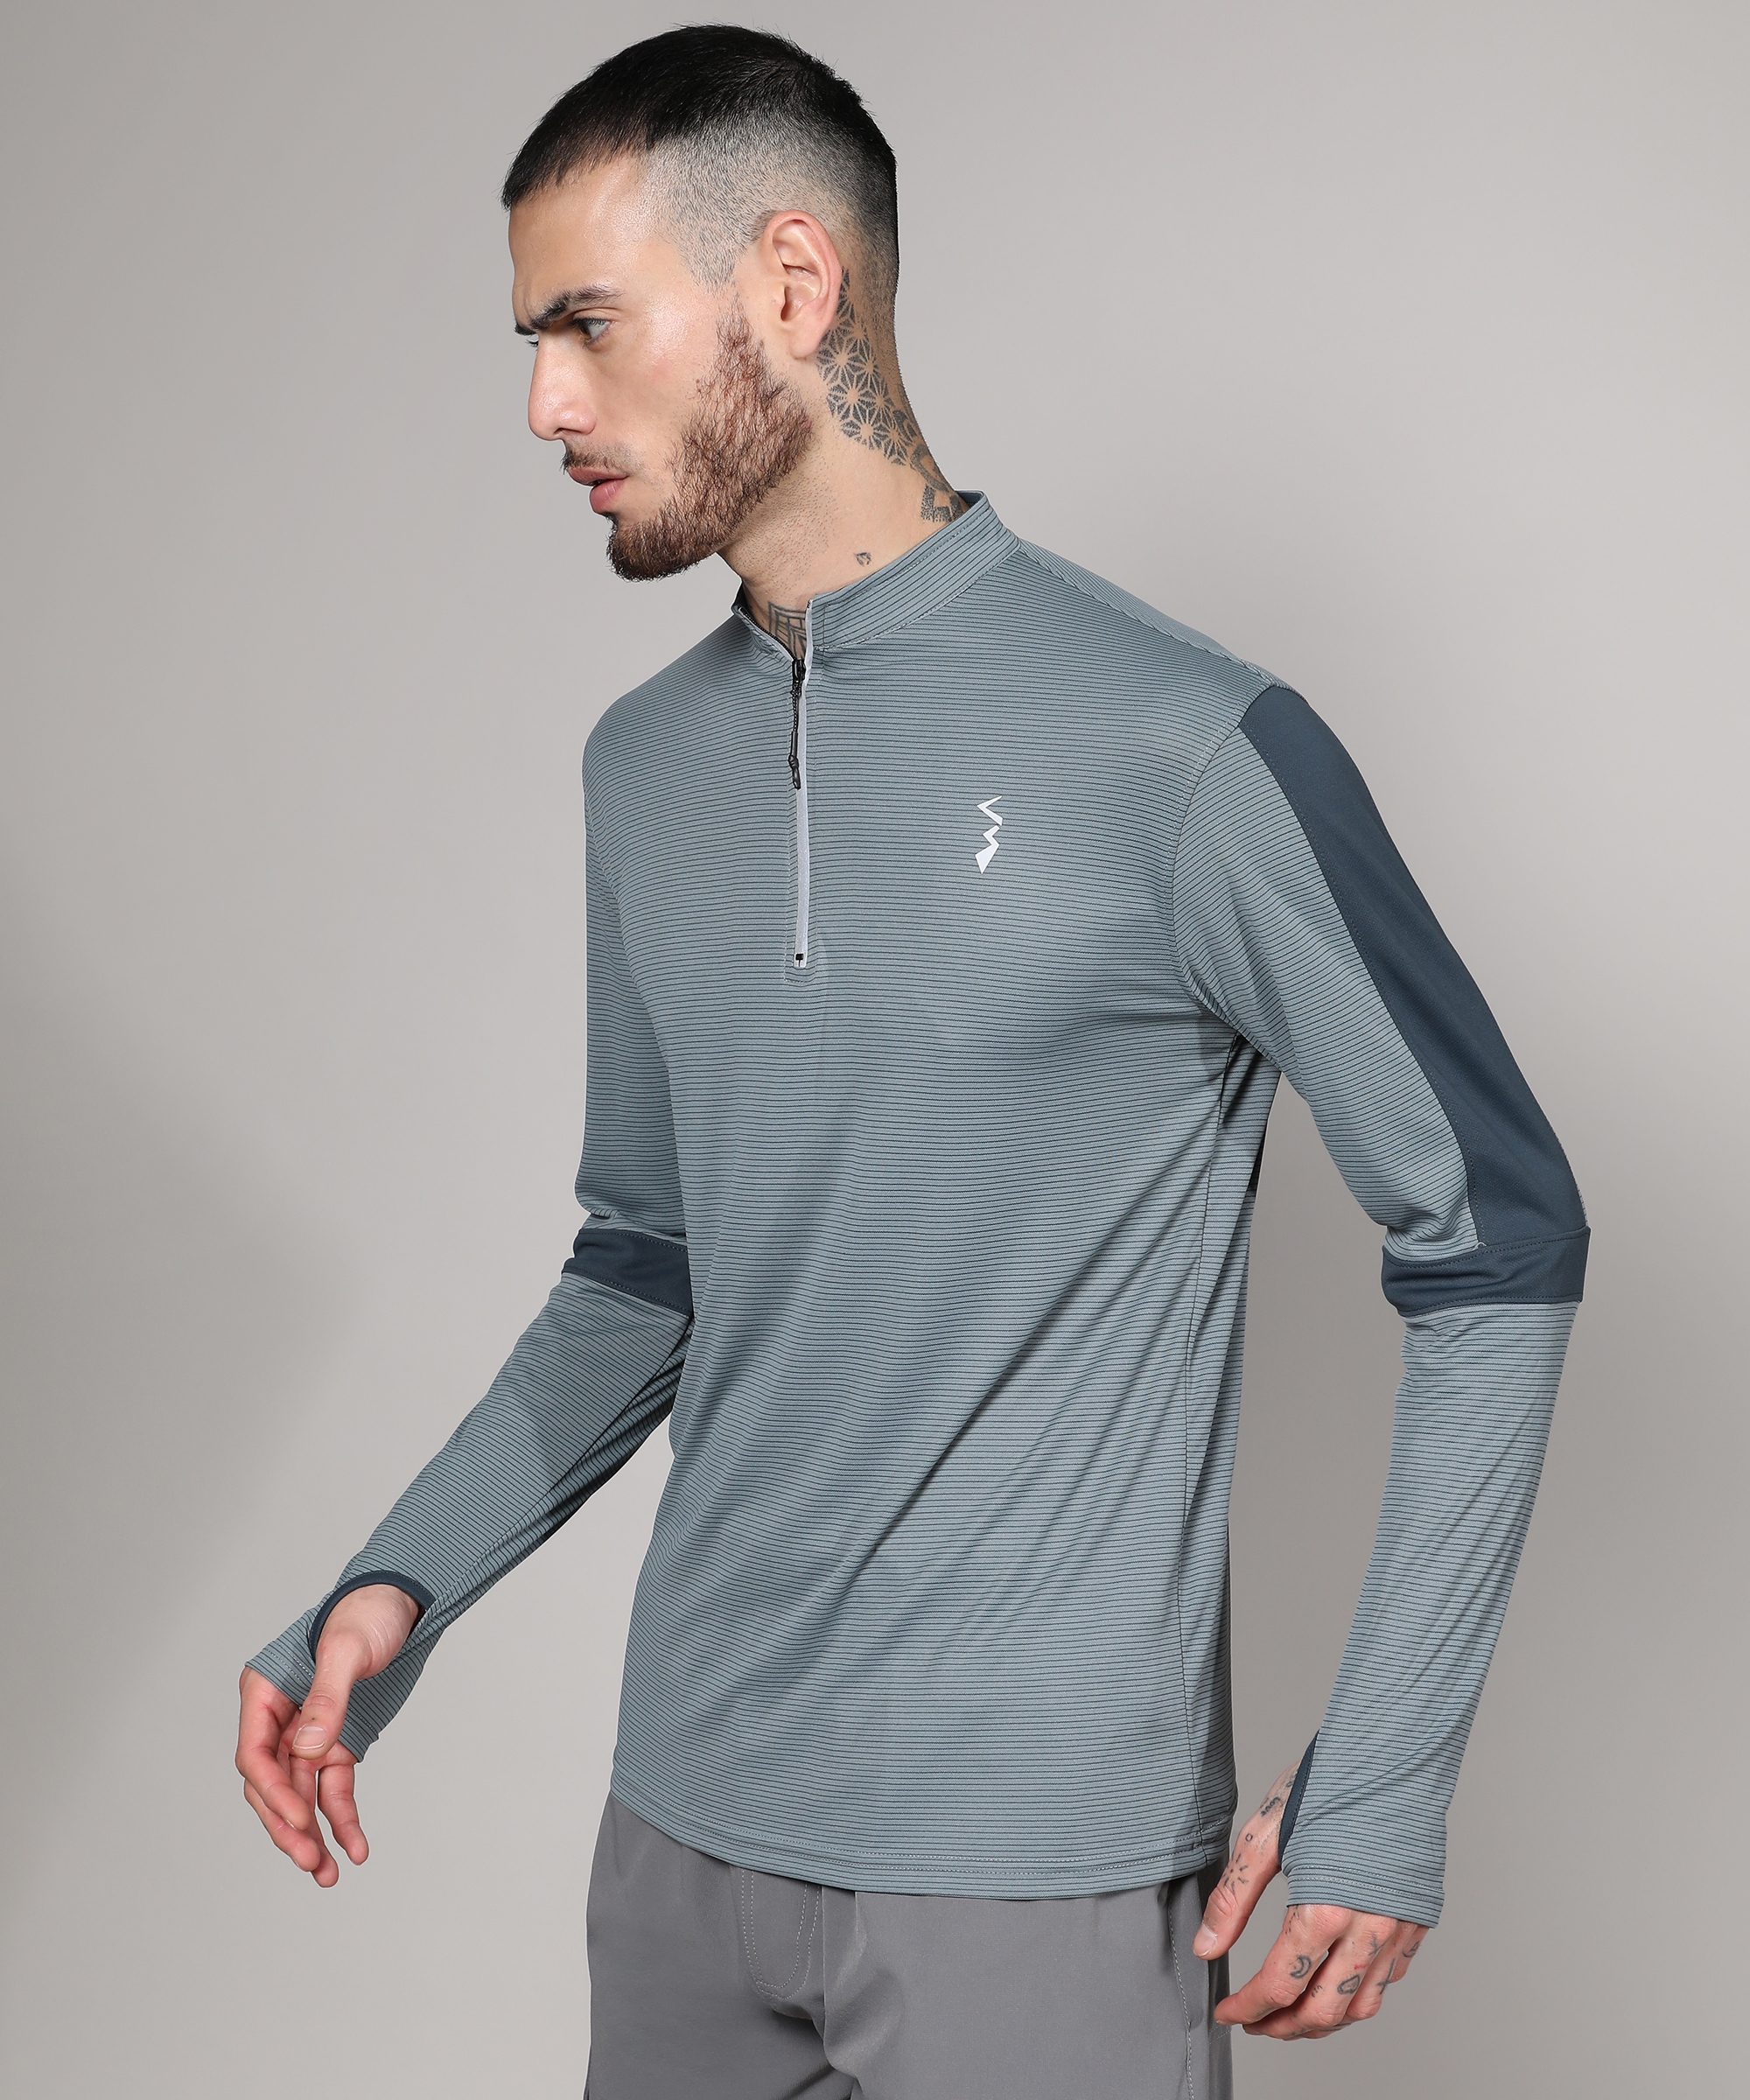 CAMPUS SUTRA | Men's Charcoal Grey Solid Activewear T-Shirt